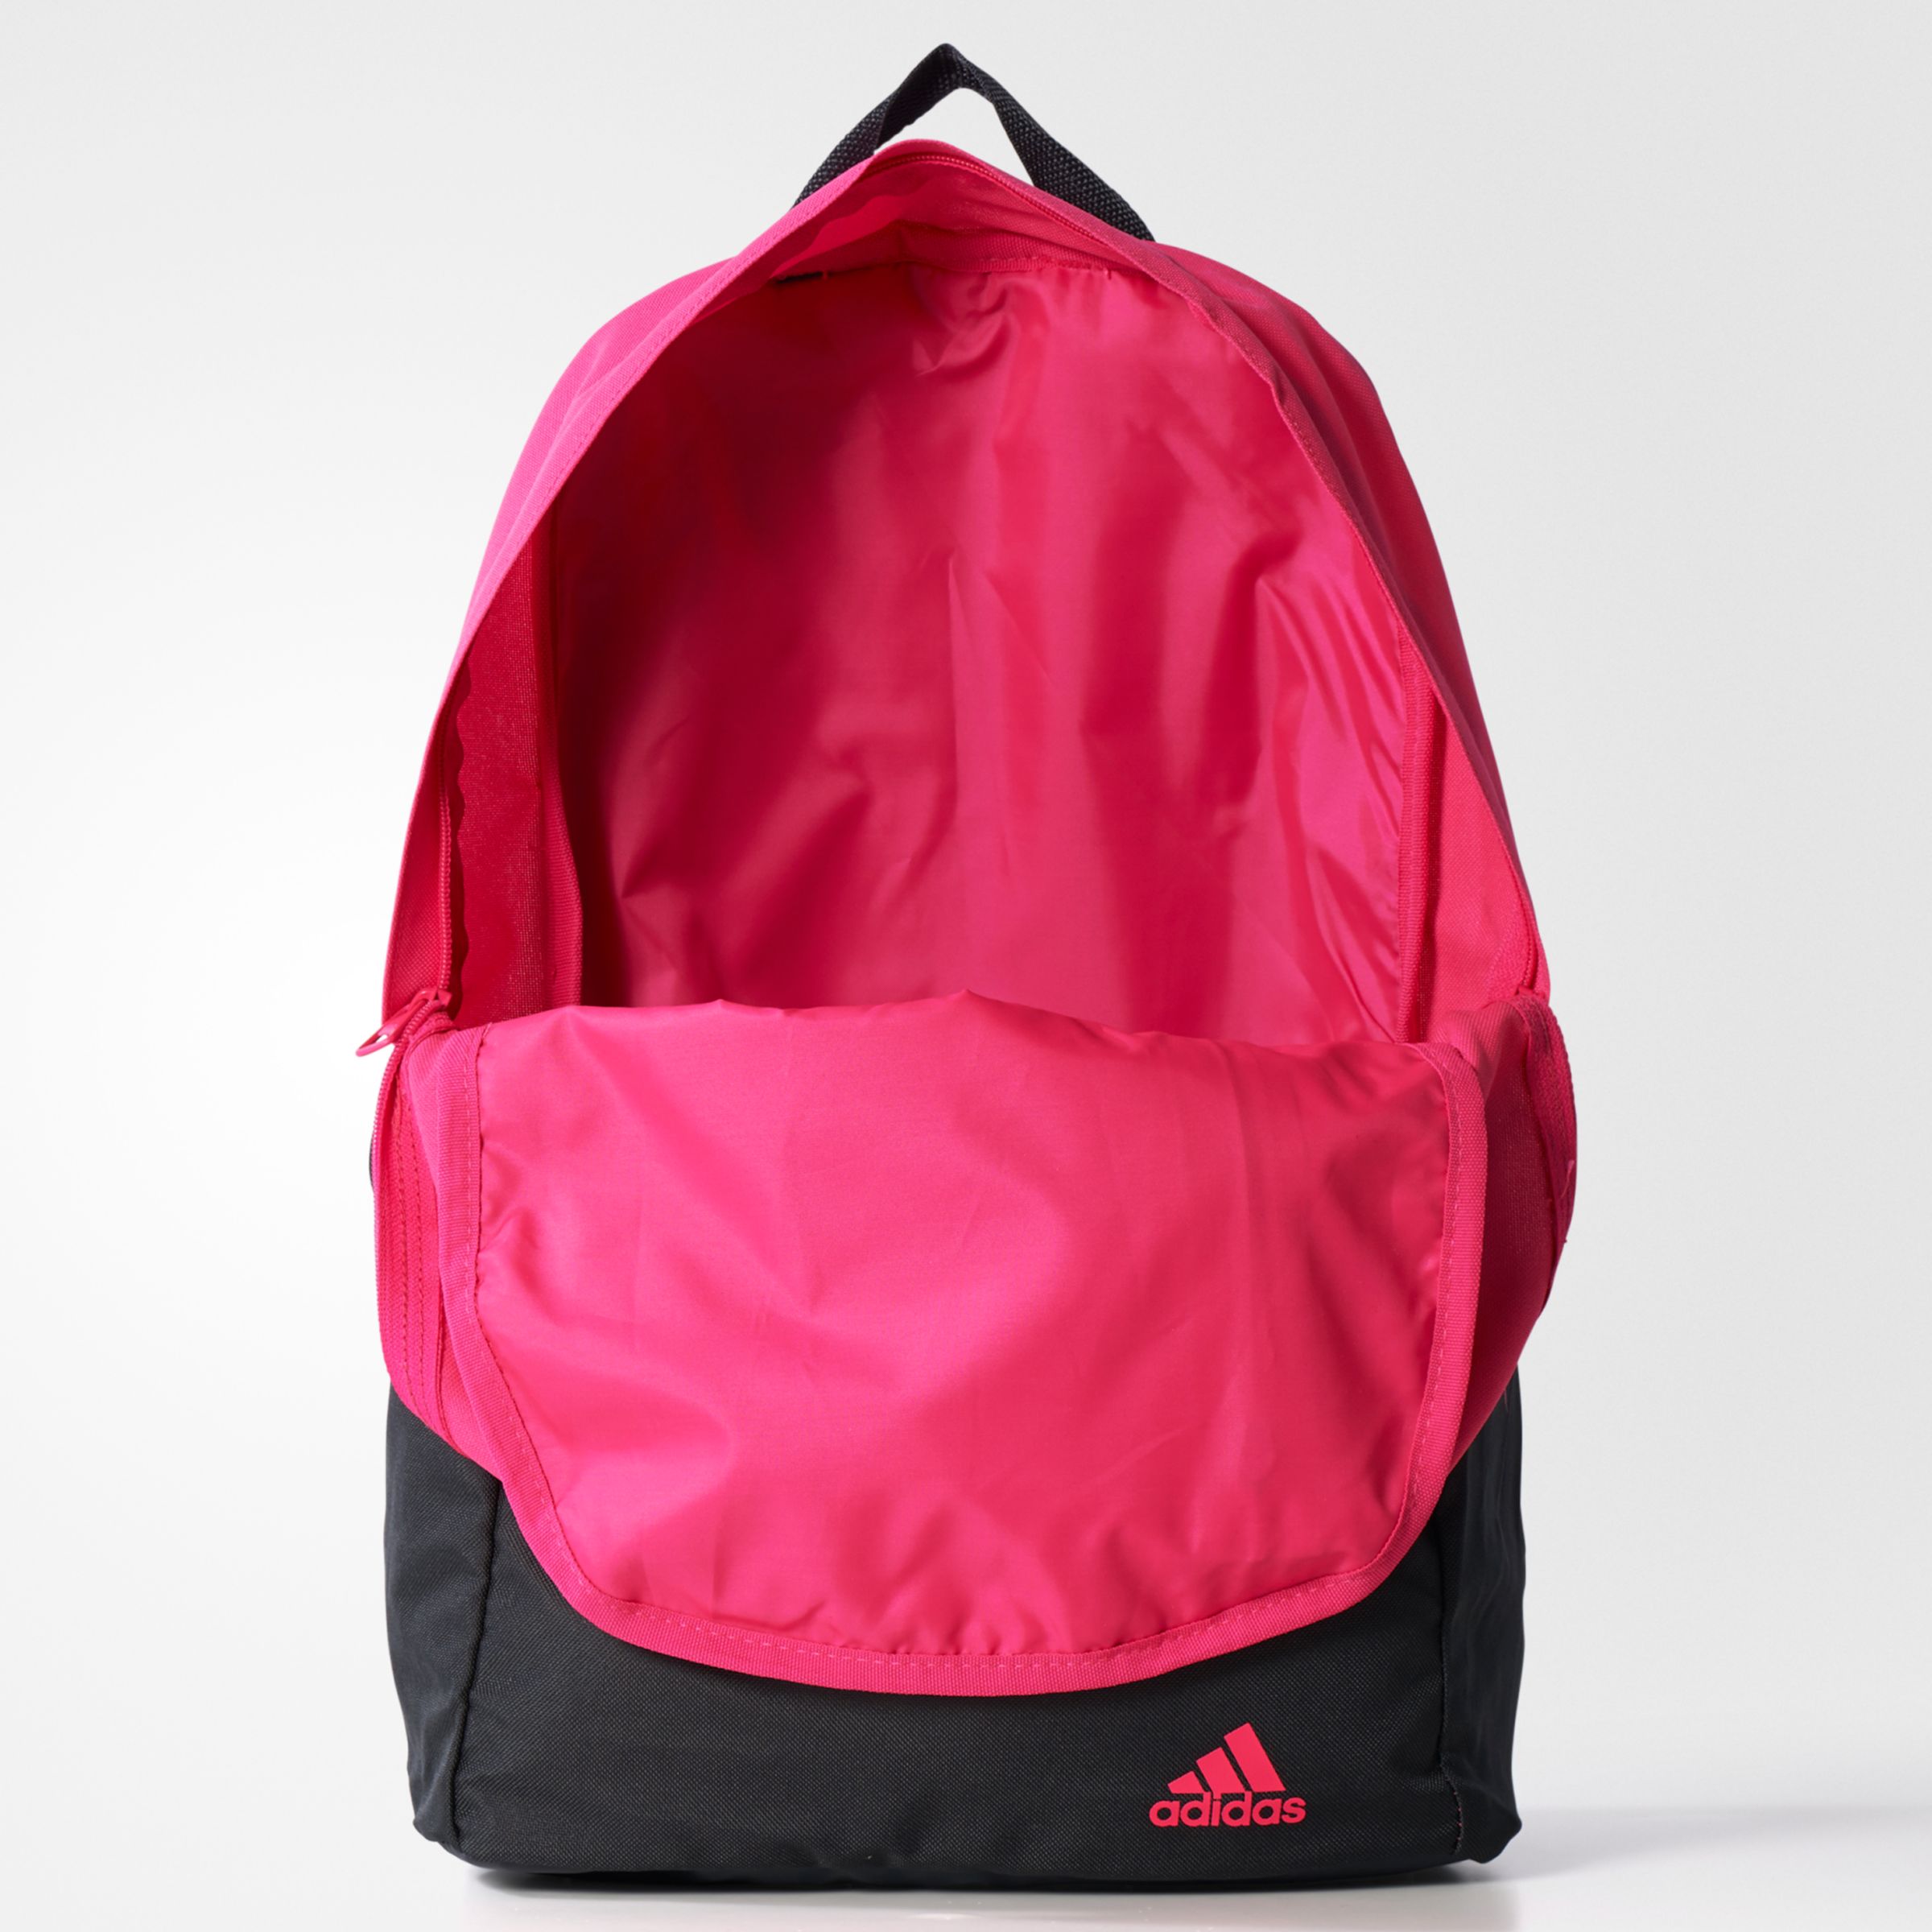 adidas backpack pink and black